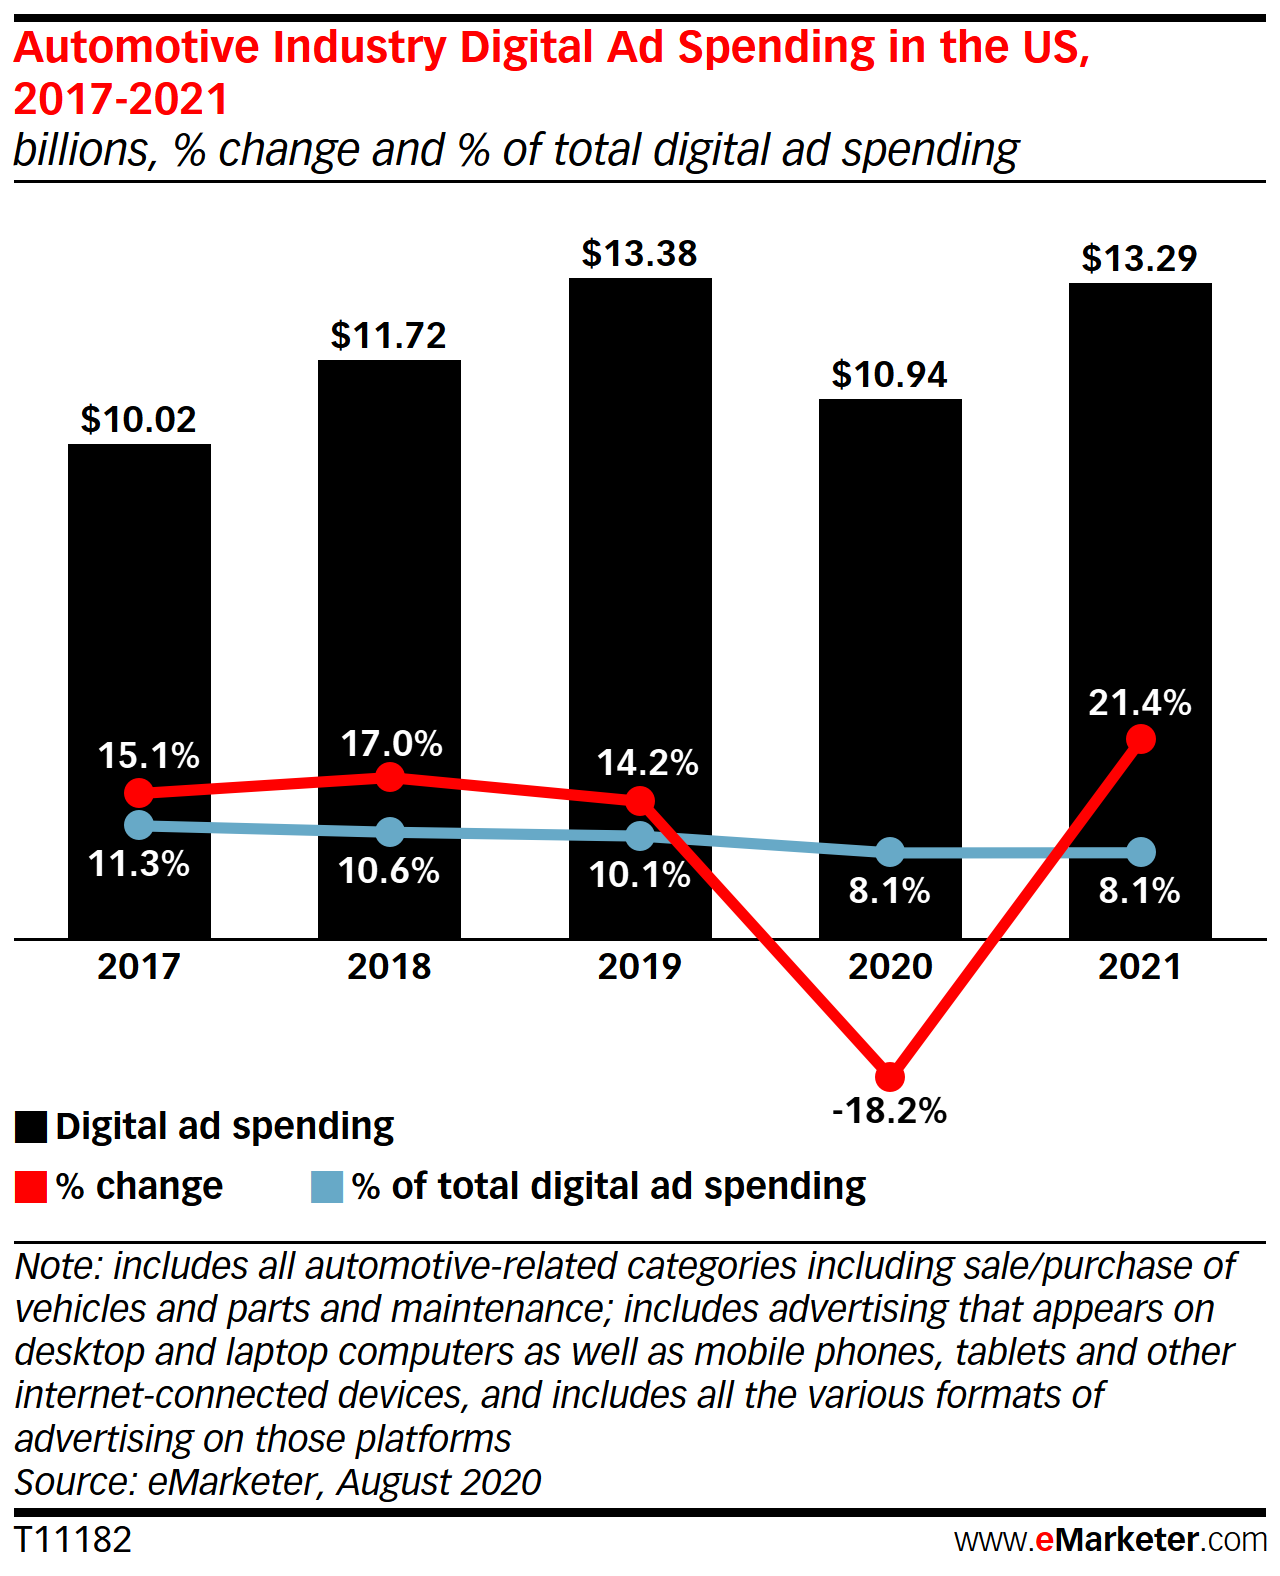 Automotive Industry Digital Ad Spending in the US, 2017-2021 (billions, % change, and % of total digital ad spending)